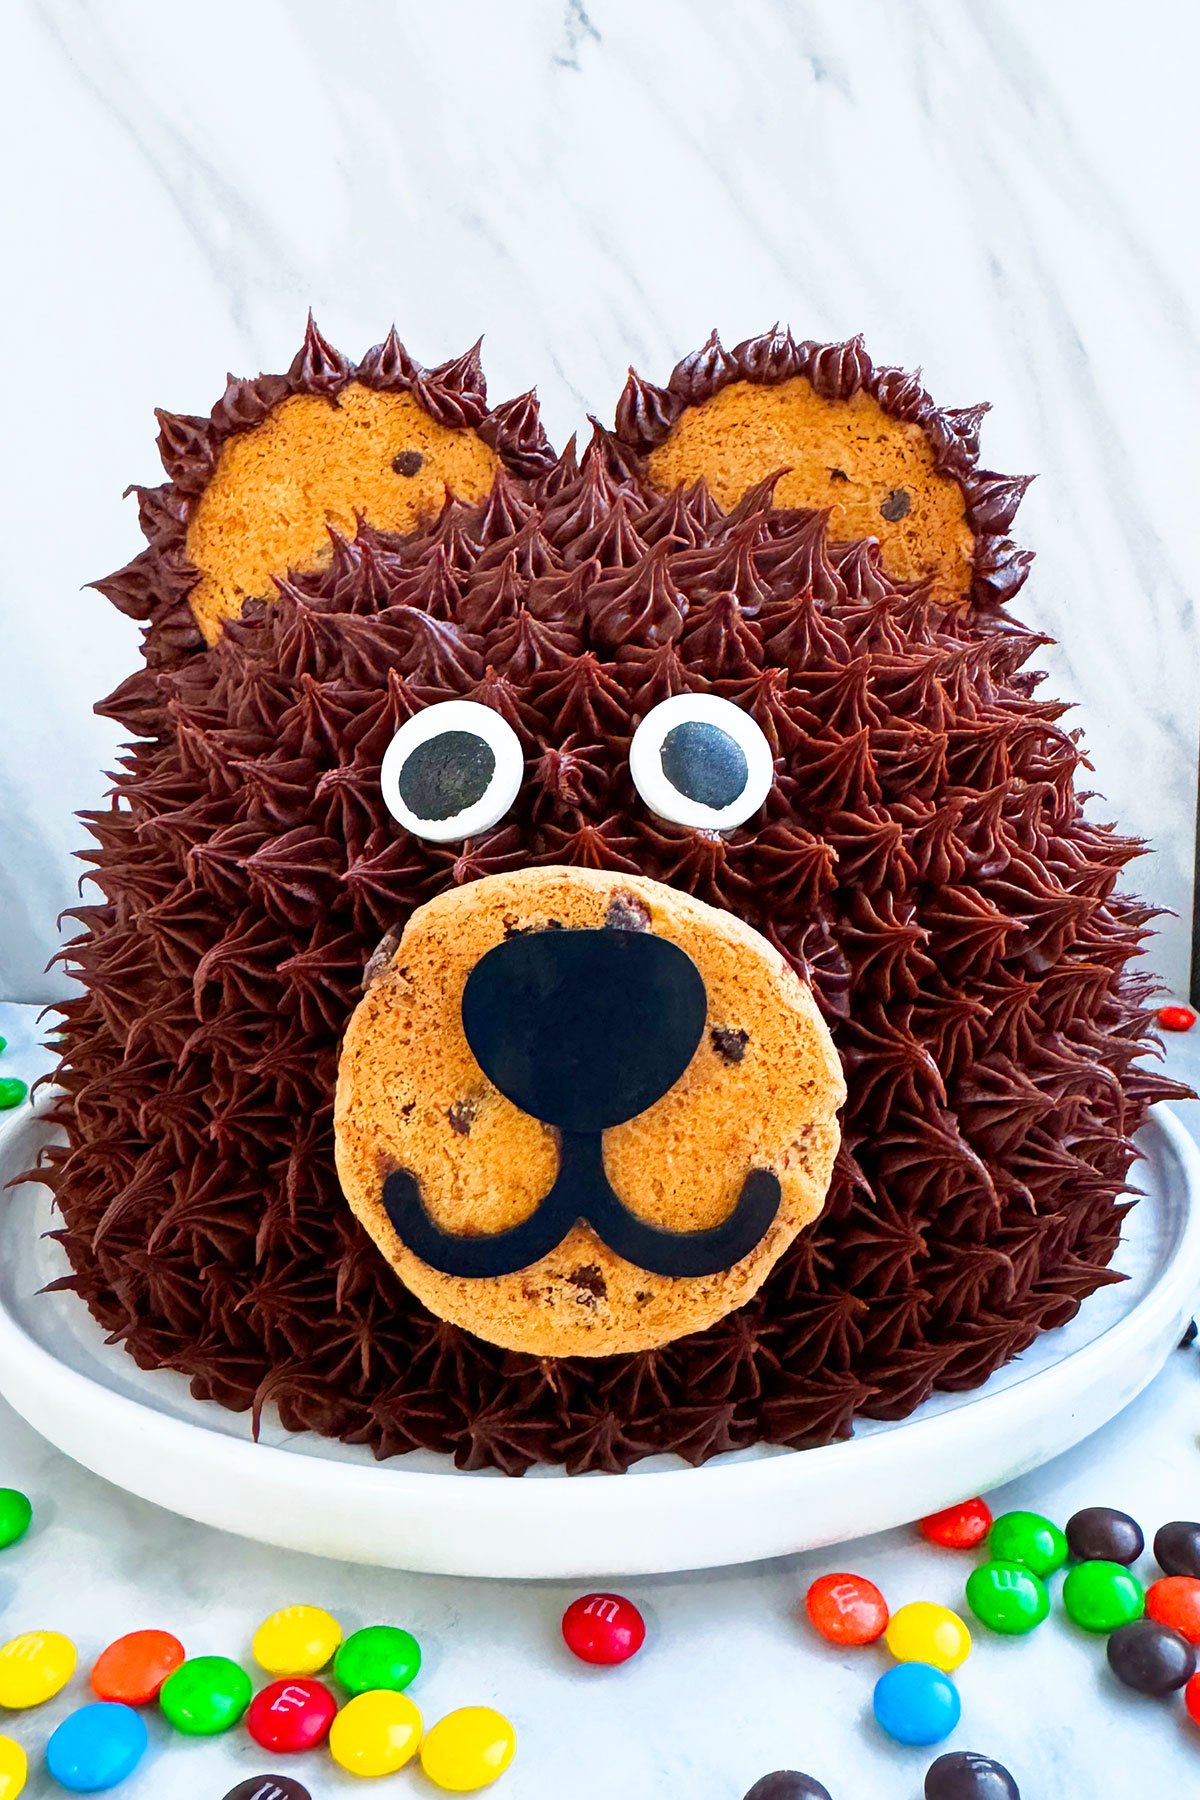 Discover more than 230 teddy bear cake super hot